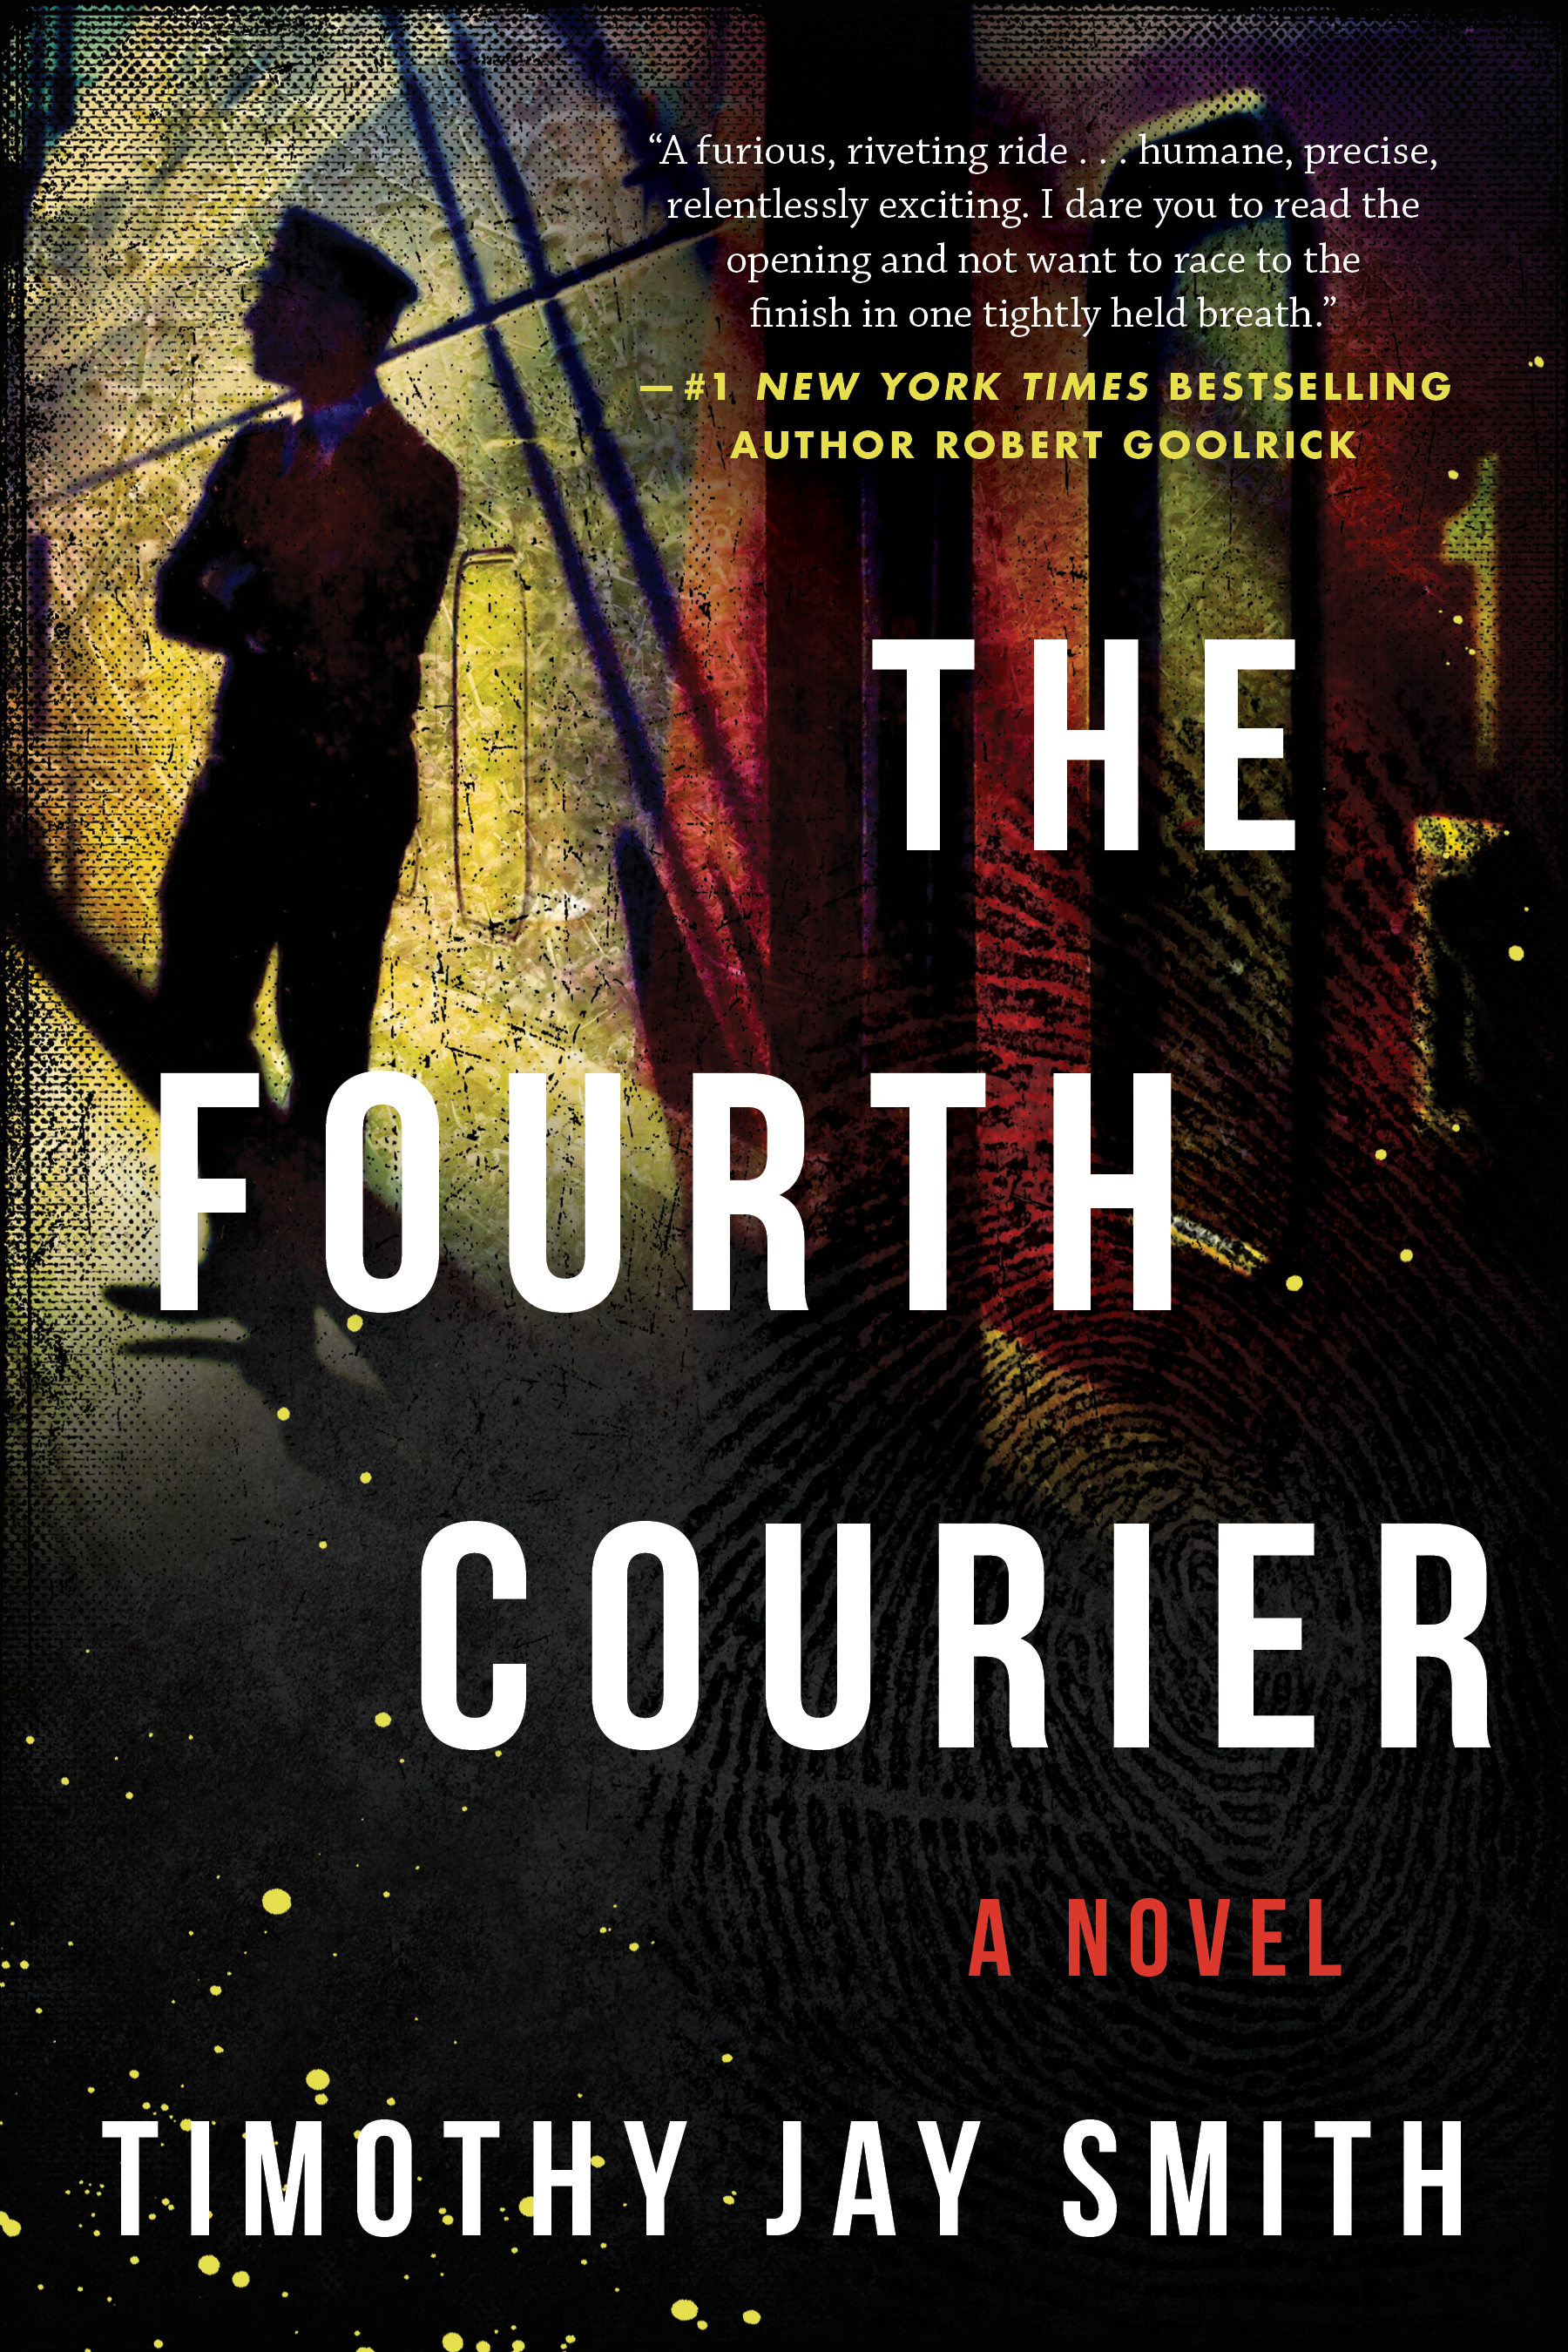 The cover of The Fourth Courier shows a man standing in shadows.